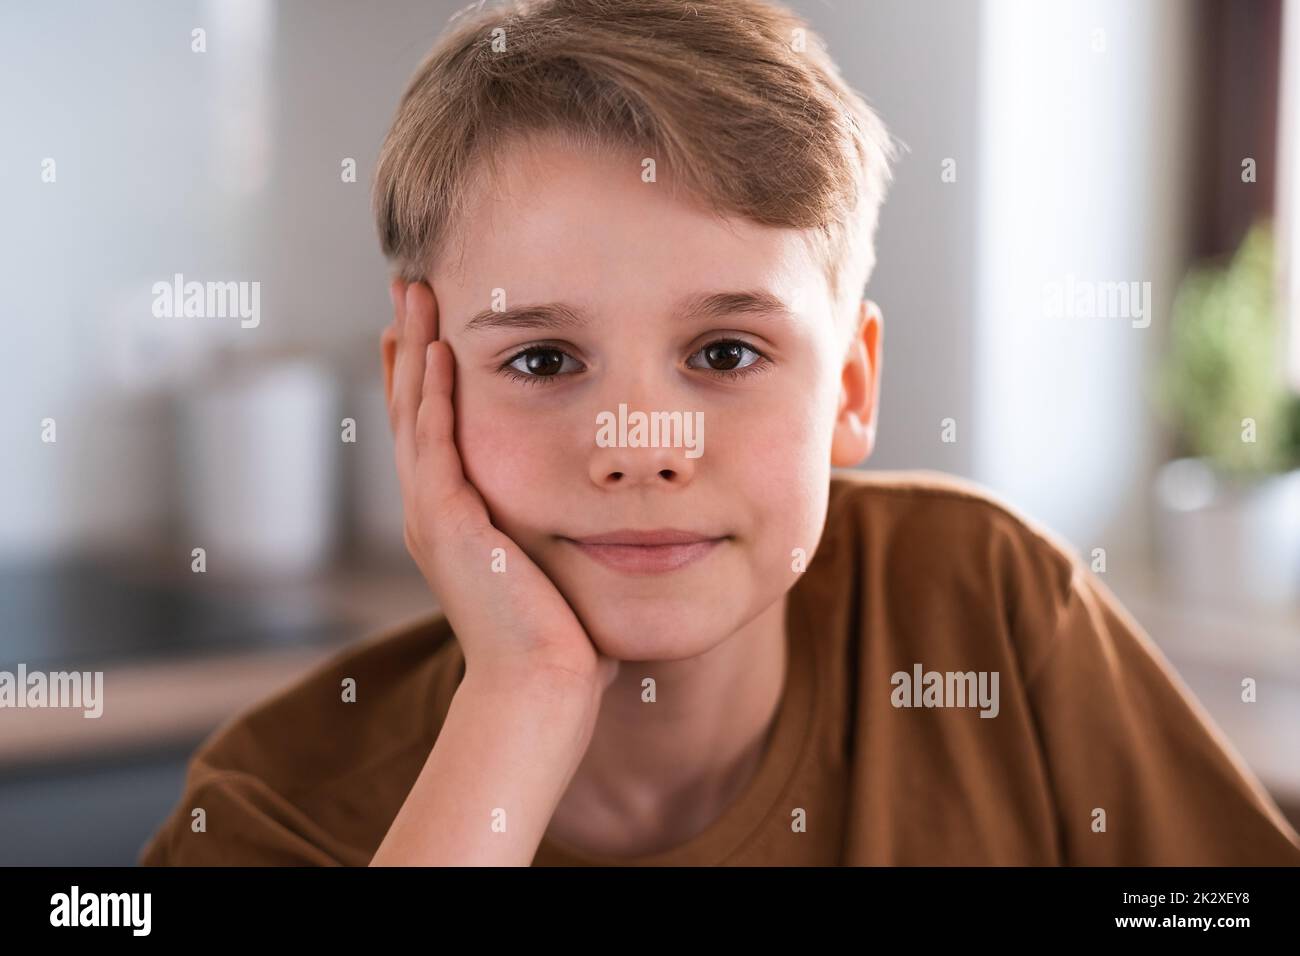 Close-up portrait teenager looking at the camera with a joyful smiling expression. Stock Photo